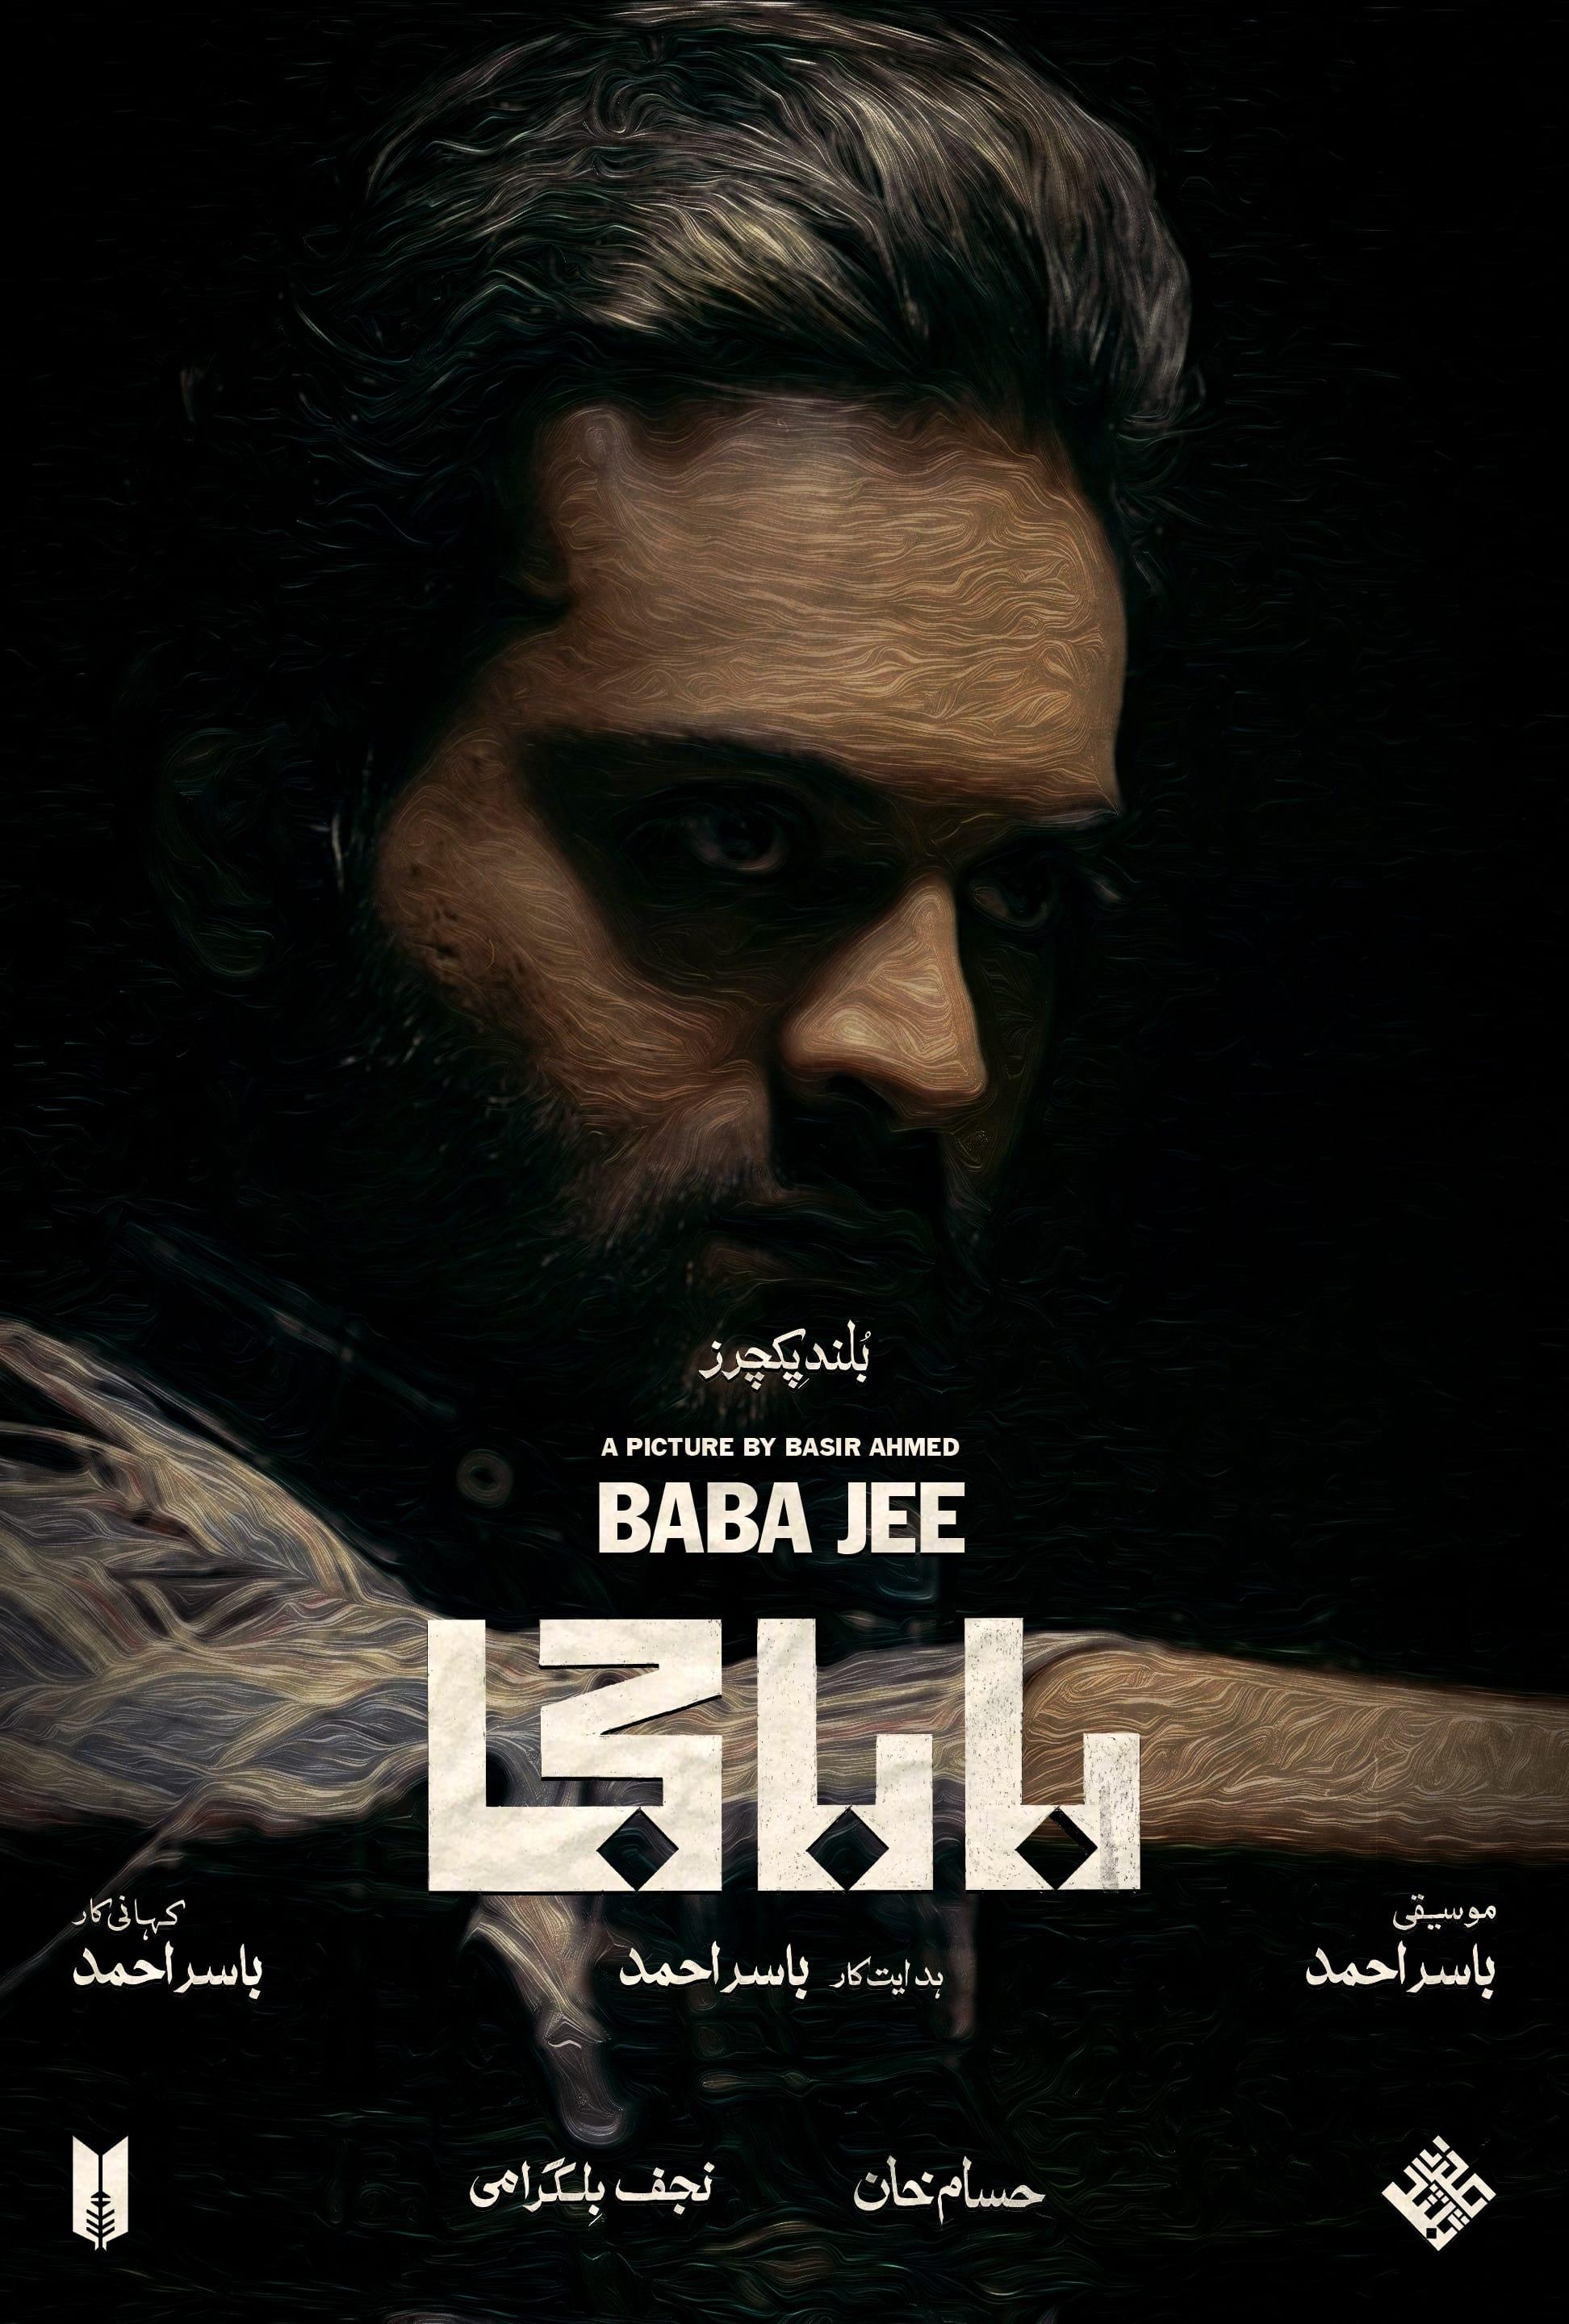 Baba Jee poster